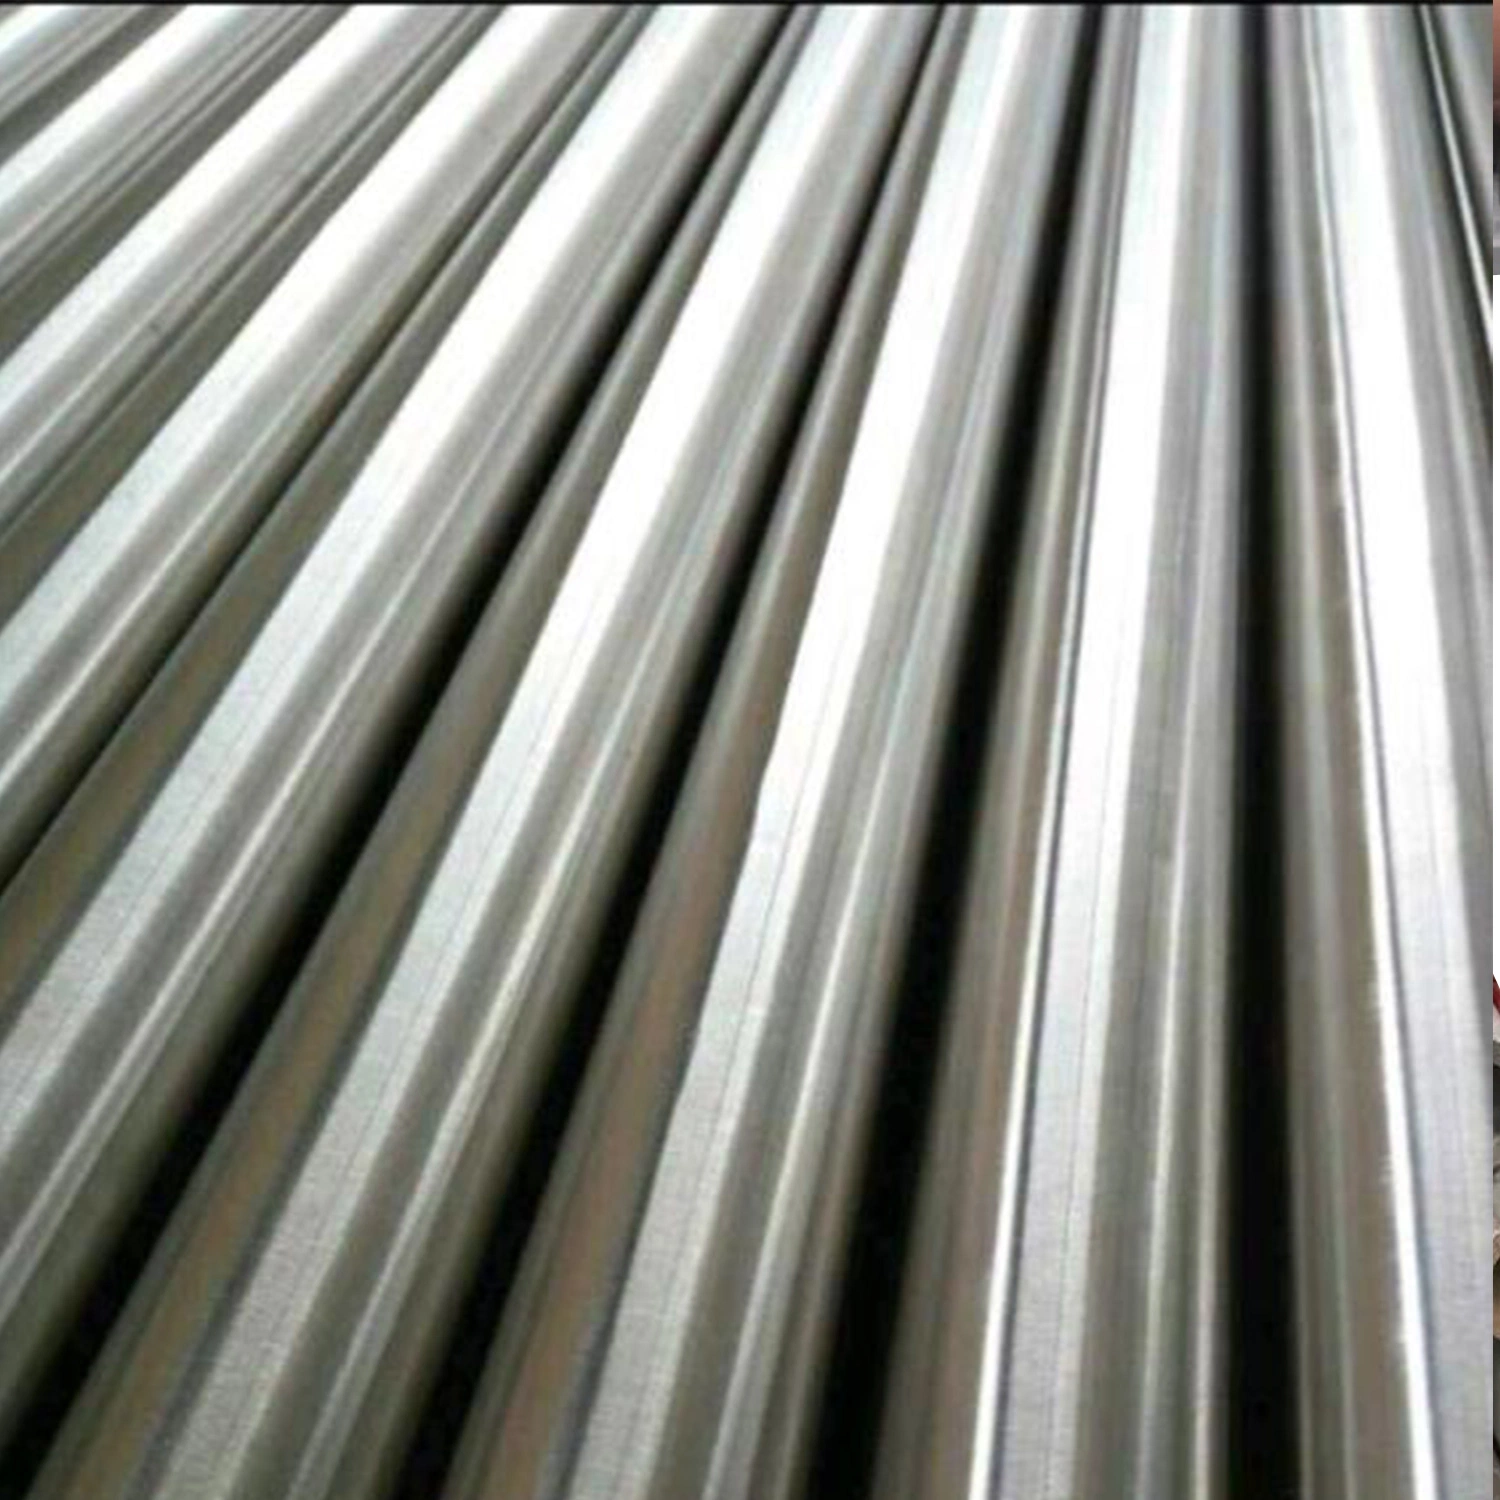 Good Price 201 303 304 316 316L 304L 321 2205 904L Price Stainless Steel Square Pipe Tube/Aluminum/Alloy Steel Pipe